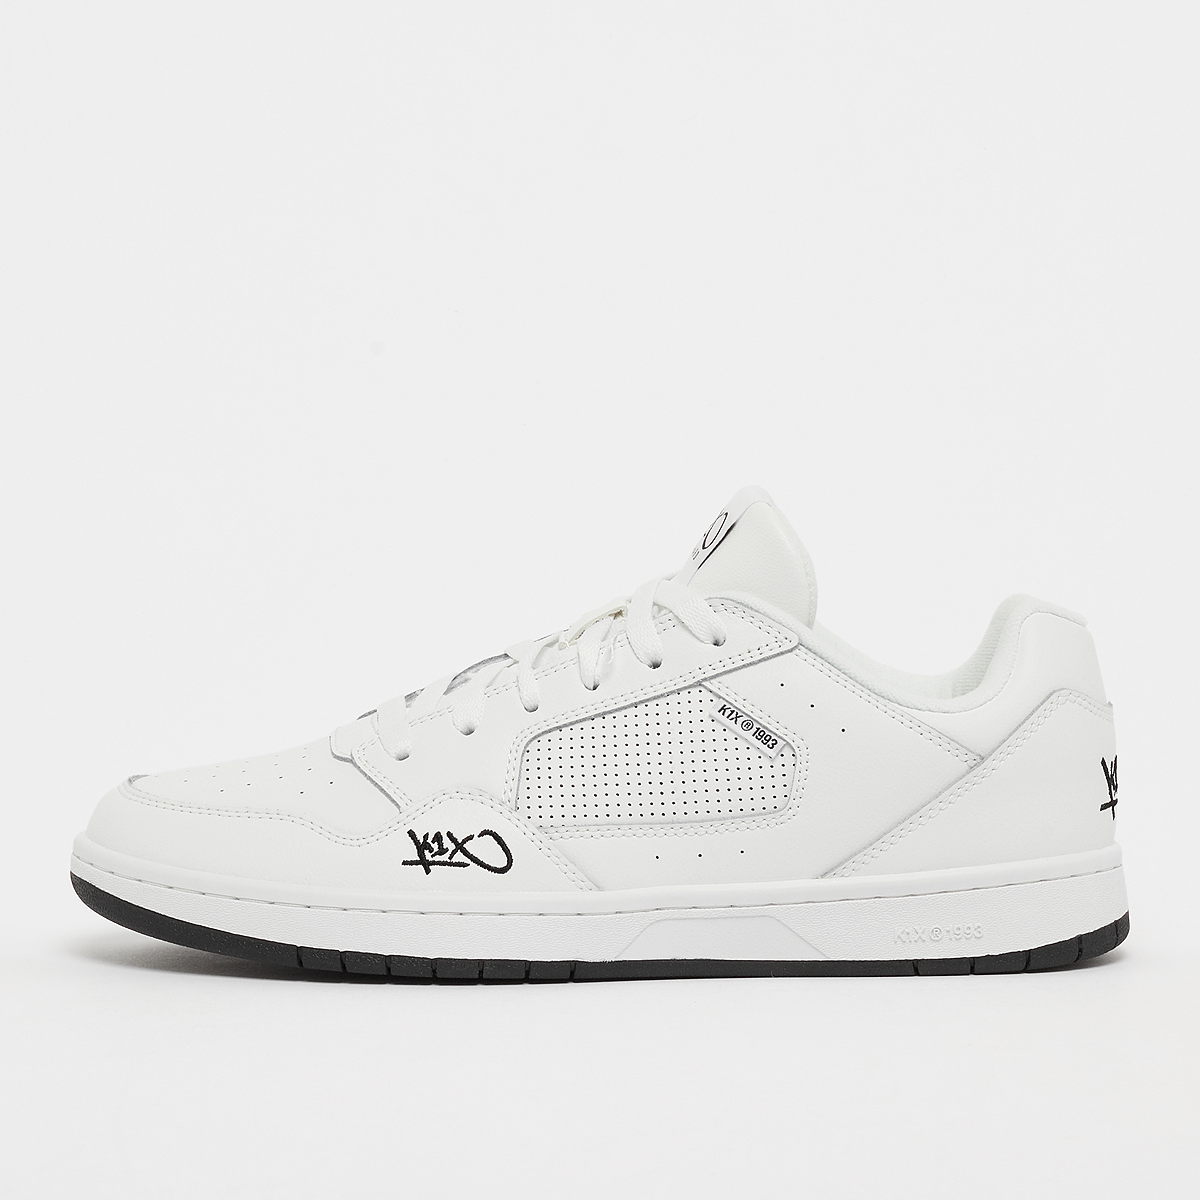 k1x sweep low, sneakers, homme, white/black, taille: 43, tailles disponibles:41,42,42.5,44,44.5,45